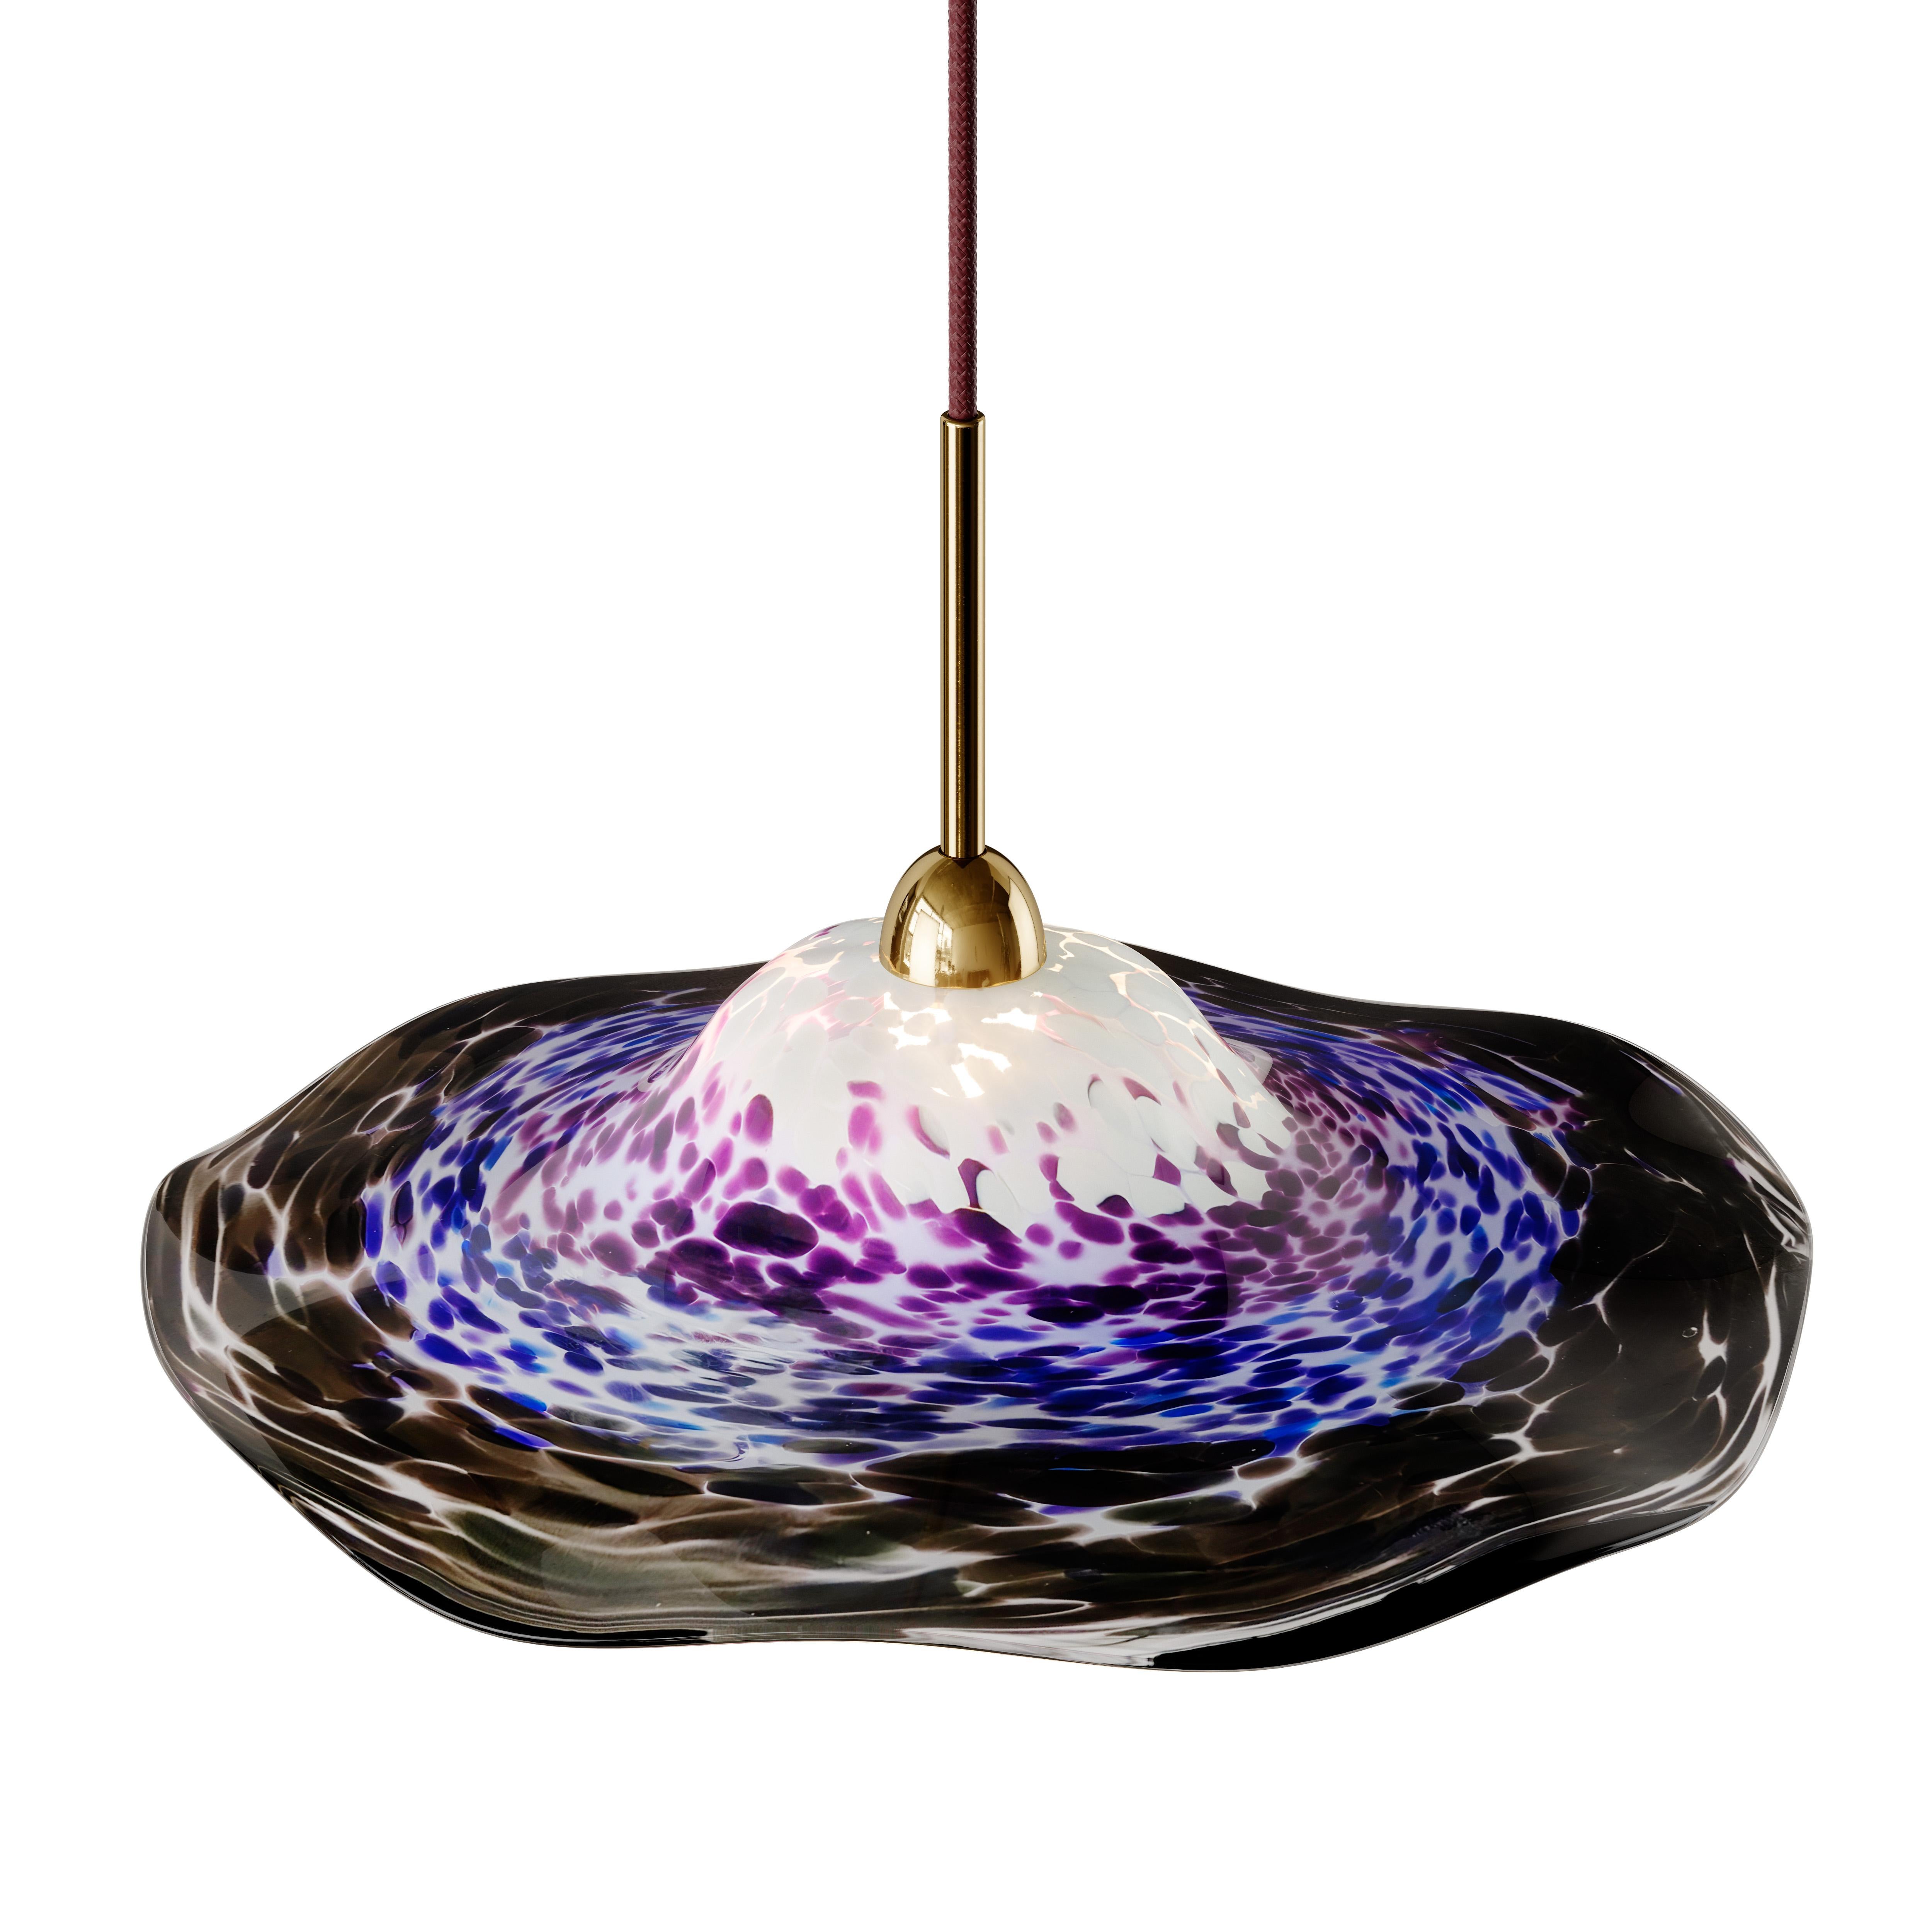 Perla takes inspiration from the oyster, with the distinctive, organic form of the decorative hand spun glass shade representing the shell, with the central light source acting as the pearl. The result is a soft and graceful luminaire that adds a